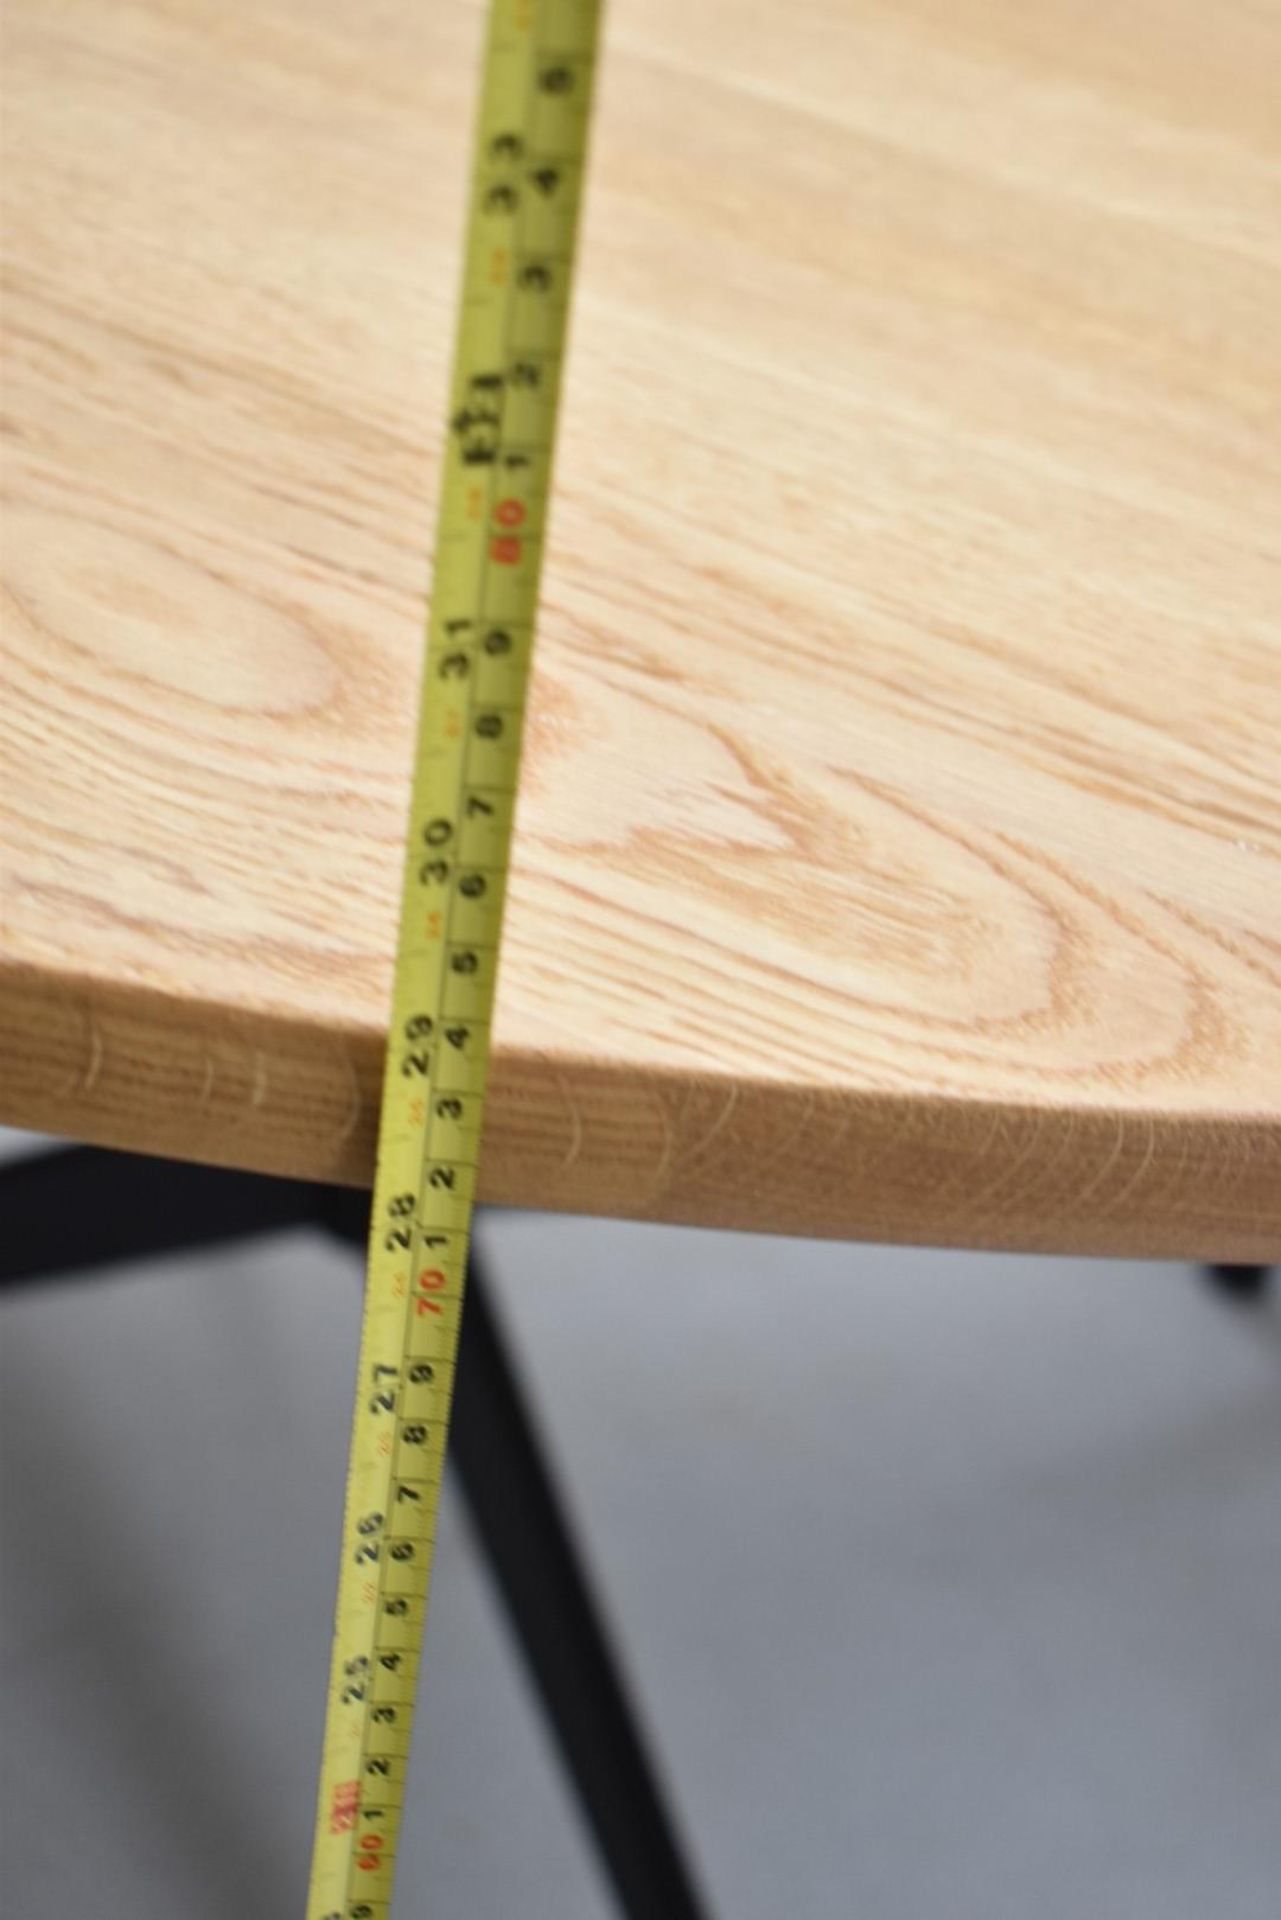 1 x VITRA / EAMES 'Segmented' Designer Solid Oak Topped Round Dining Table - Original Price £1,750 - Image 7 of 7